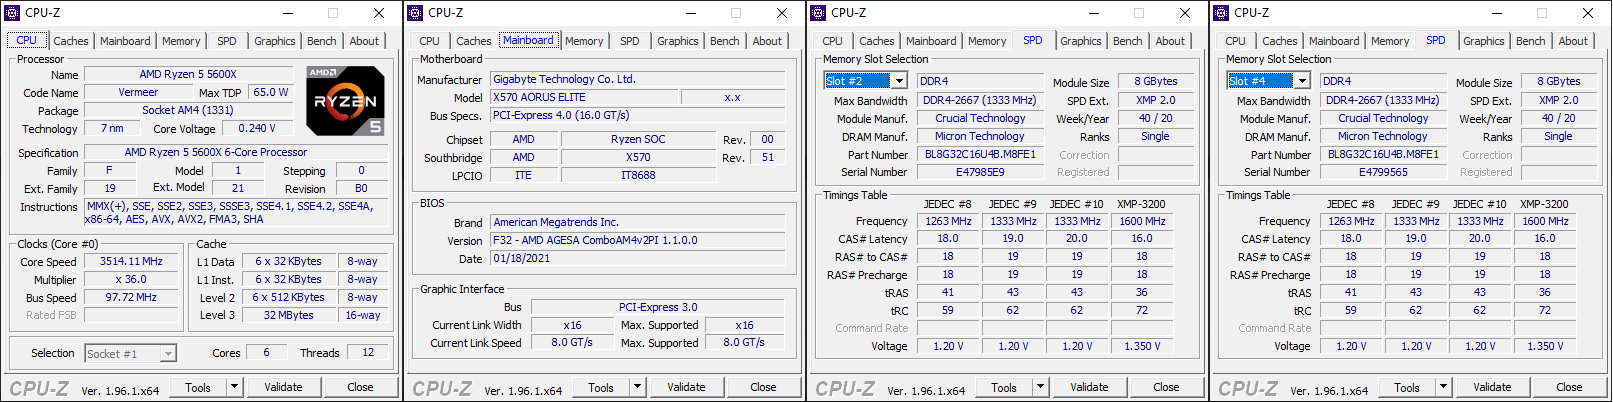 AMD-PC-Specs.png